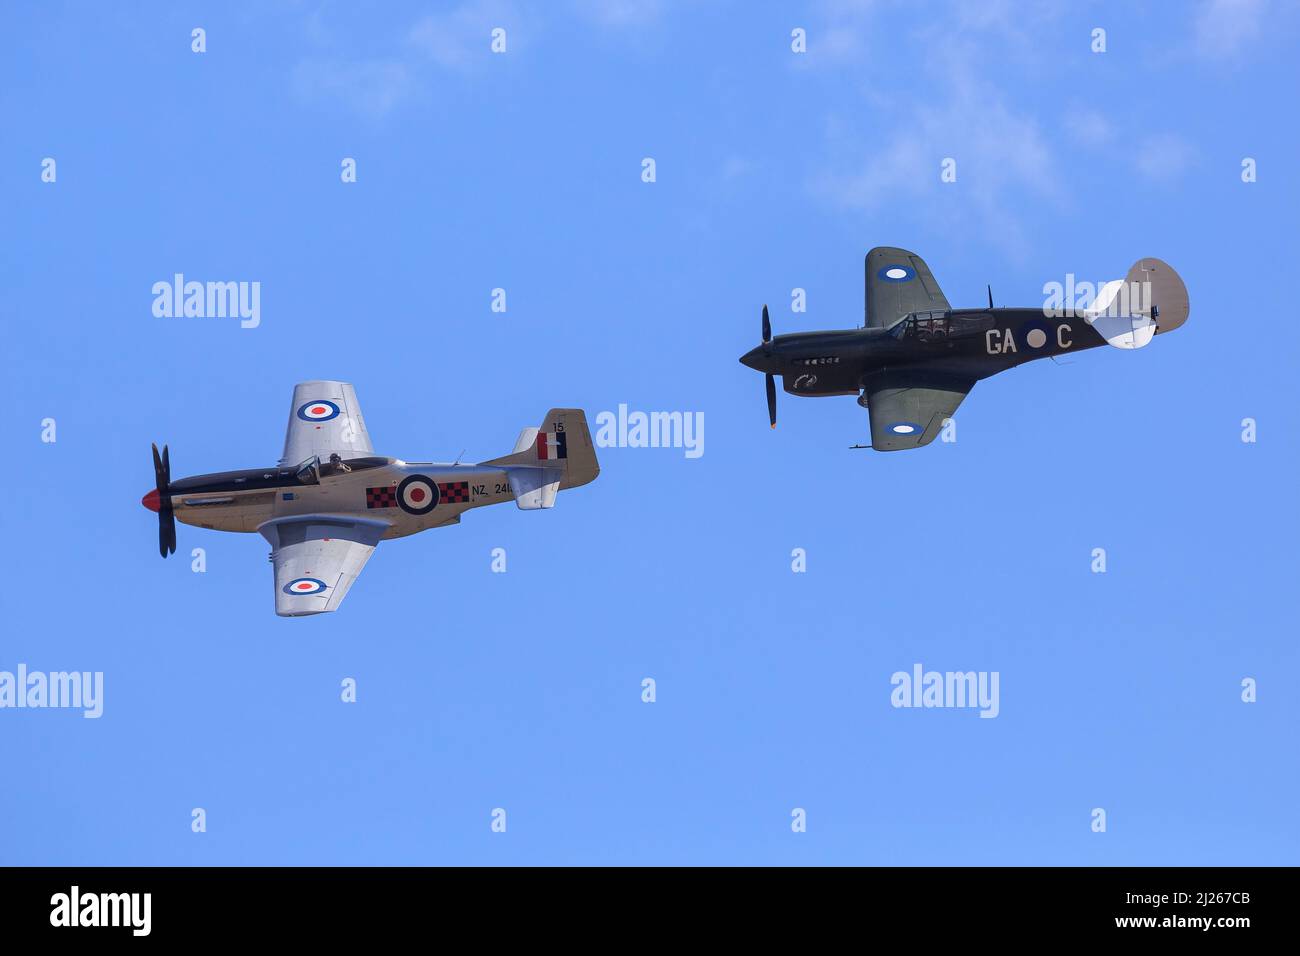 Historic World War II fighter planes, a P-51 Mustang (silver) and a Curtiss P-40 Kittyhawk (green) in flight at an airshow Stock Photo